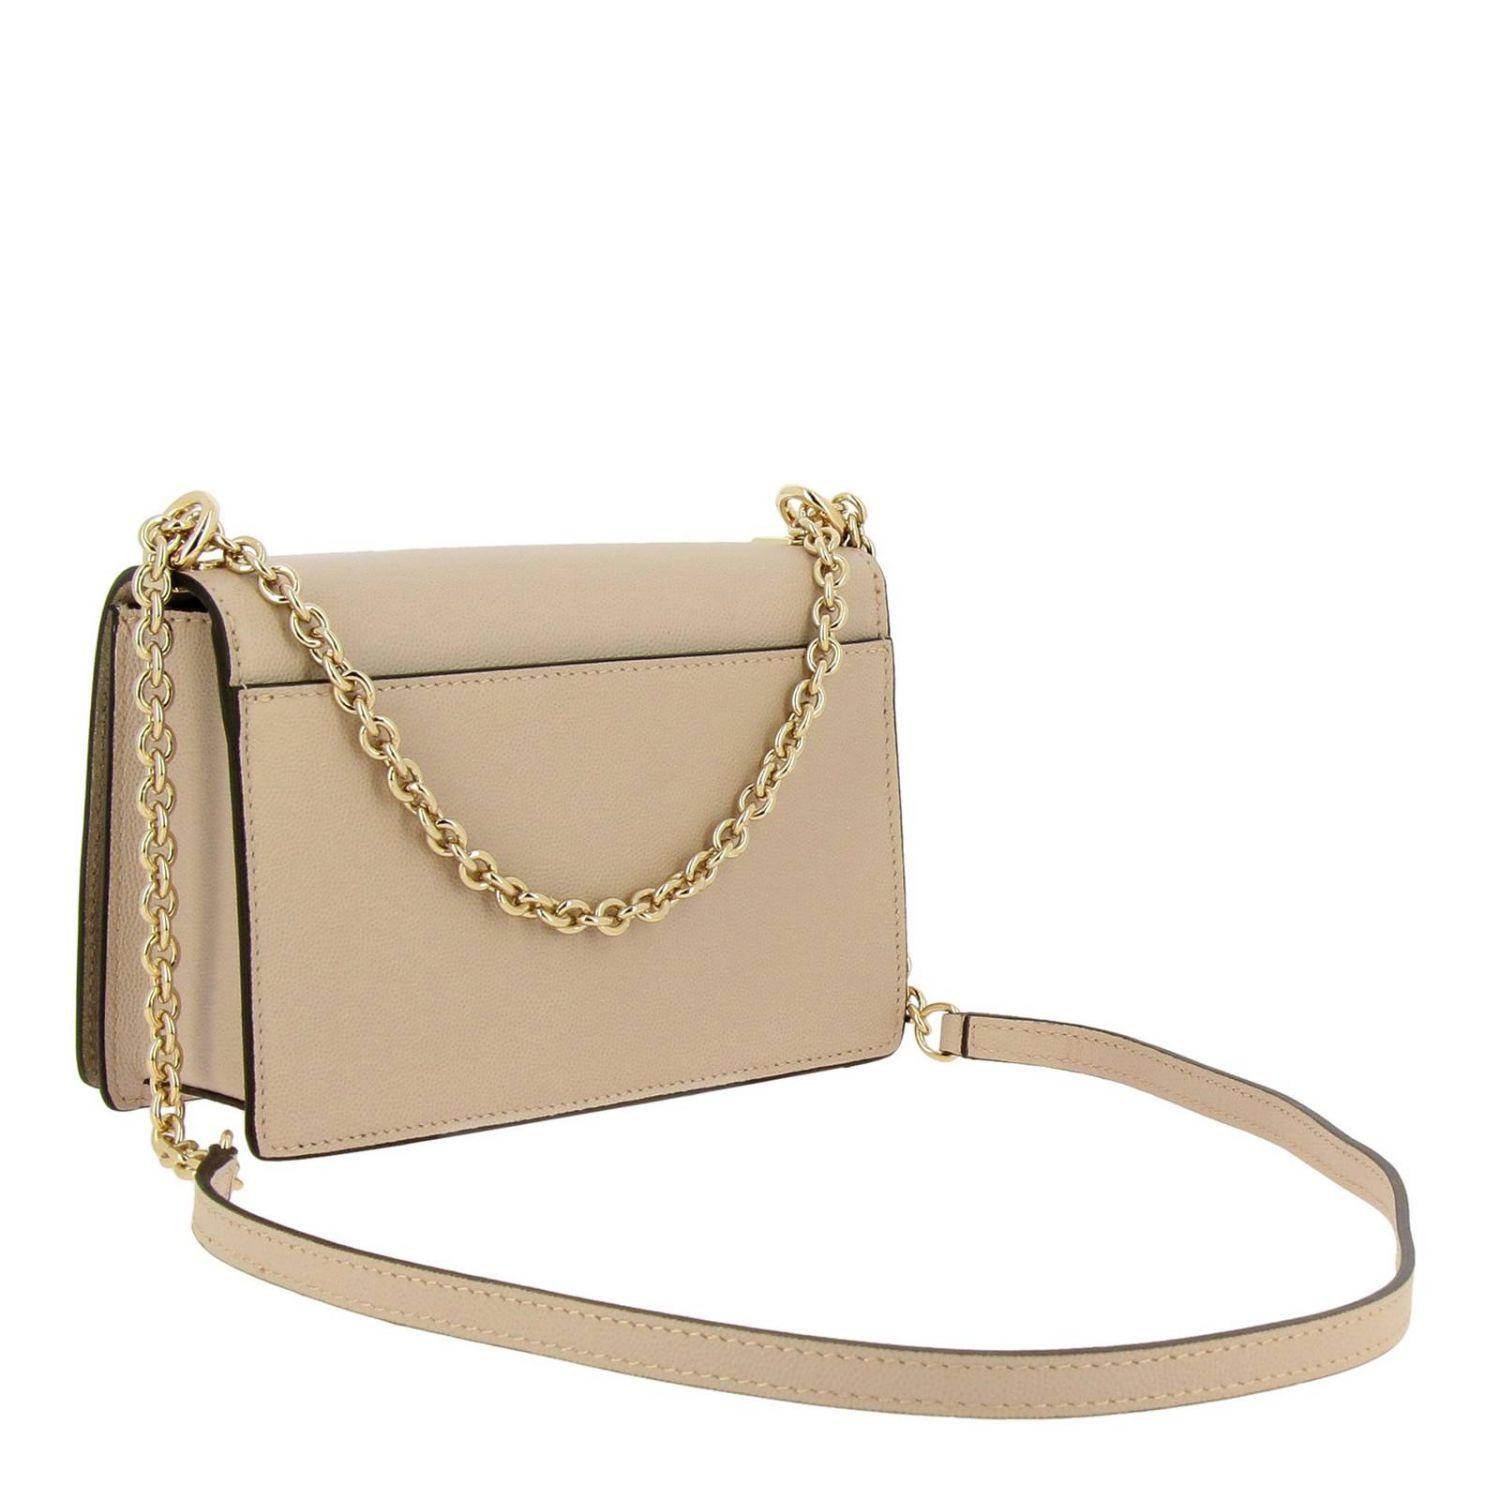 Natural Cross Body Bag Clearance, 57% OFF | a4accounting.com.au